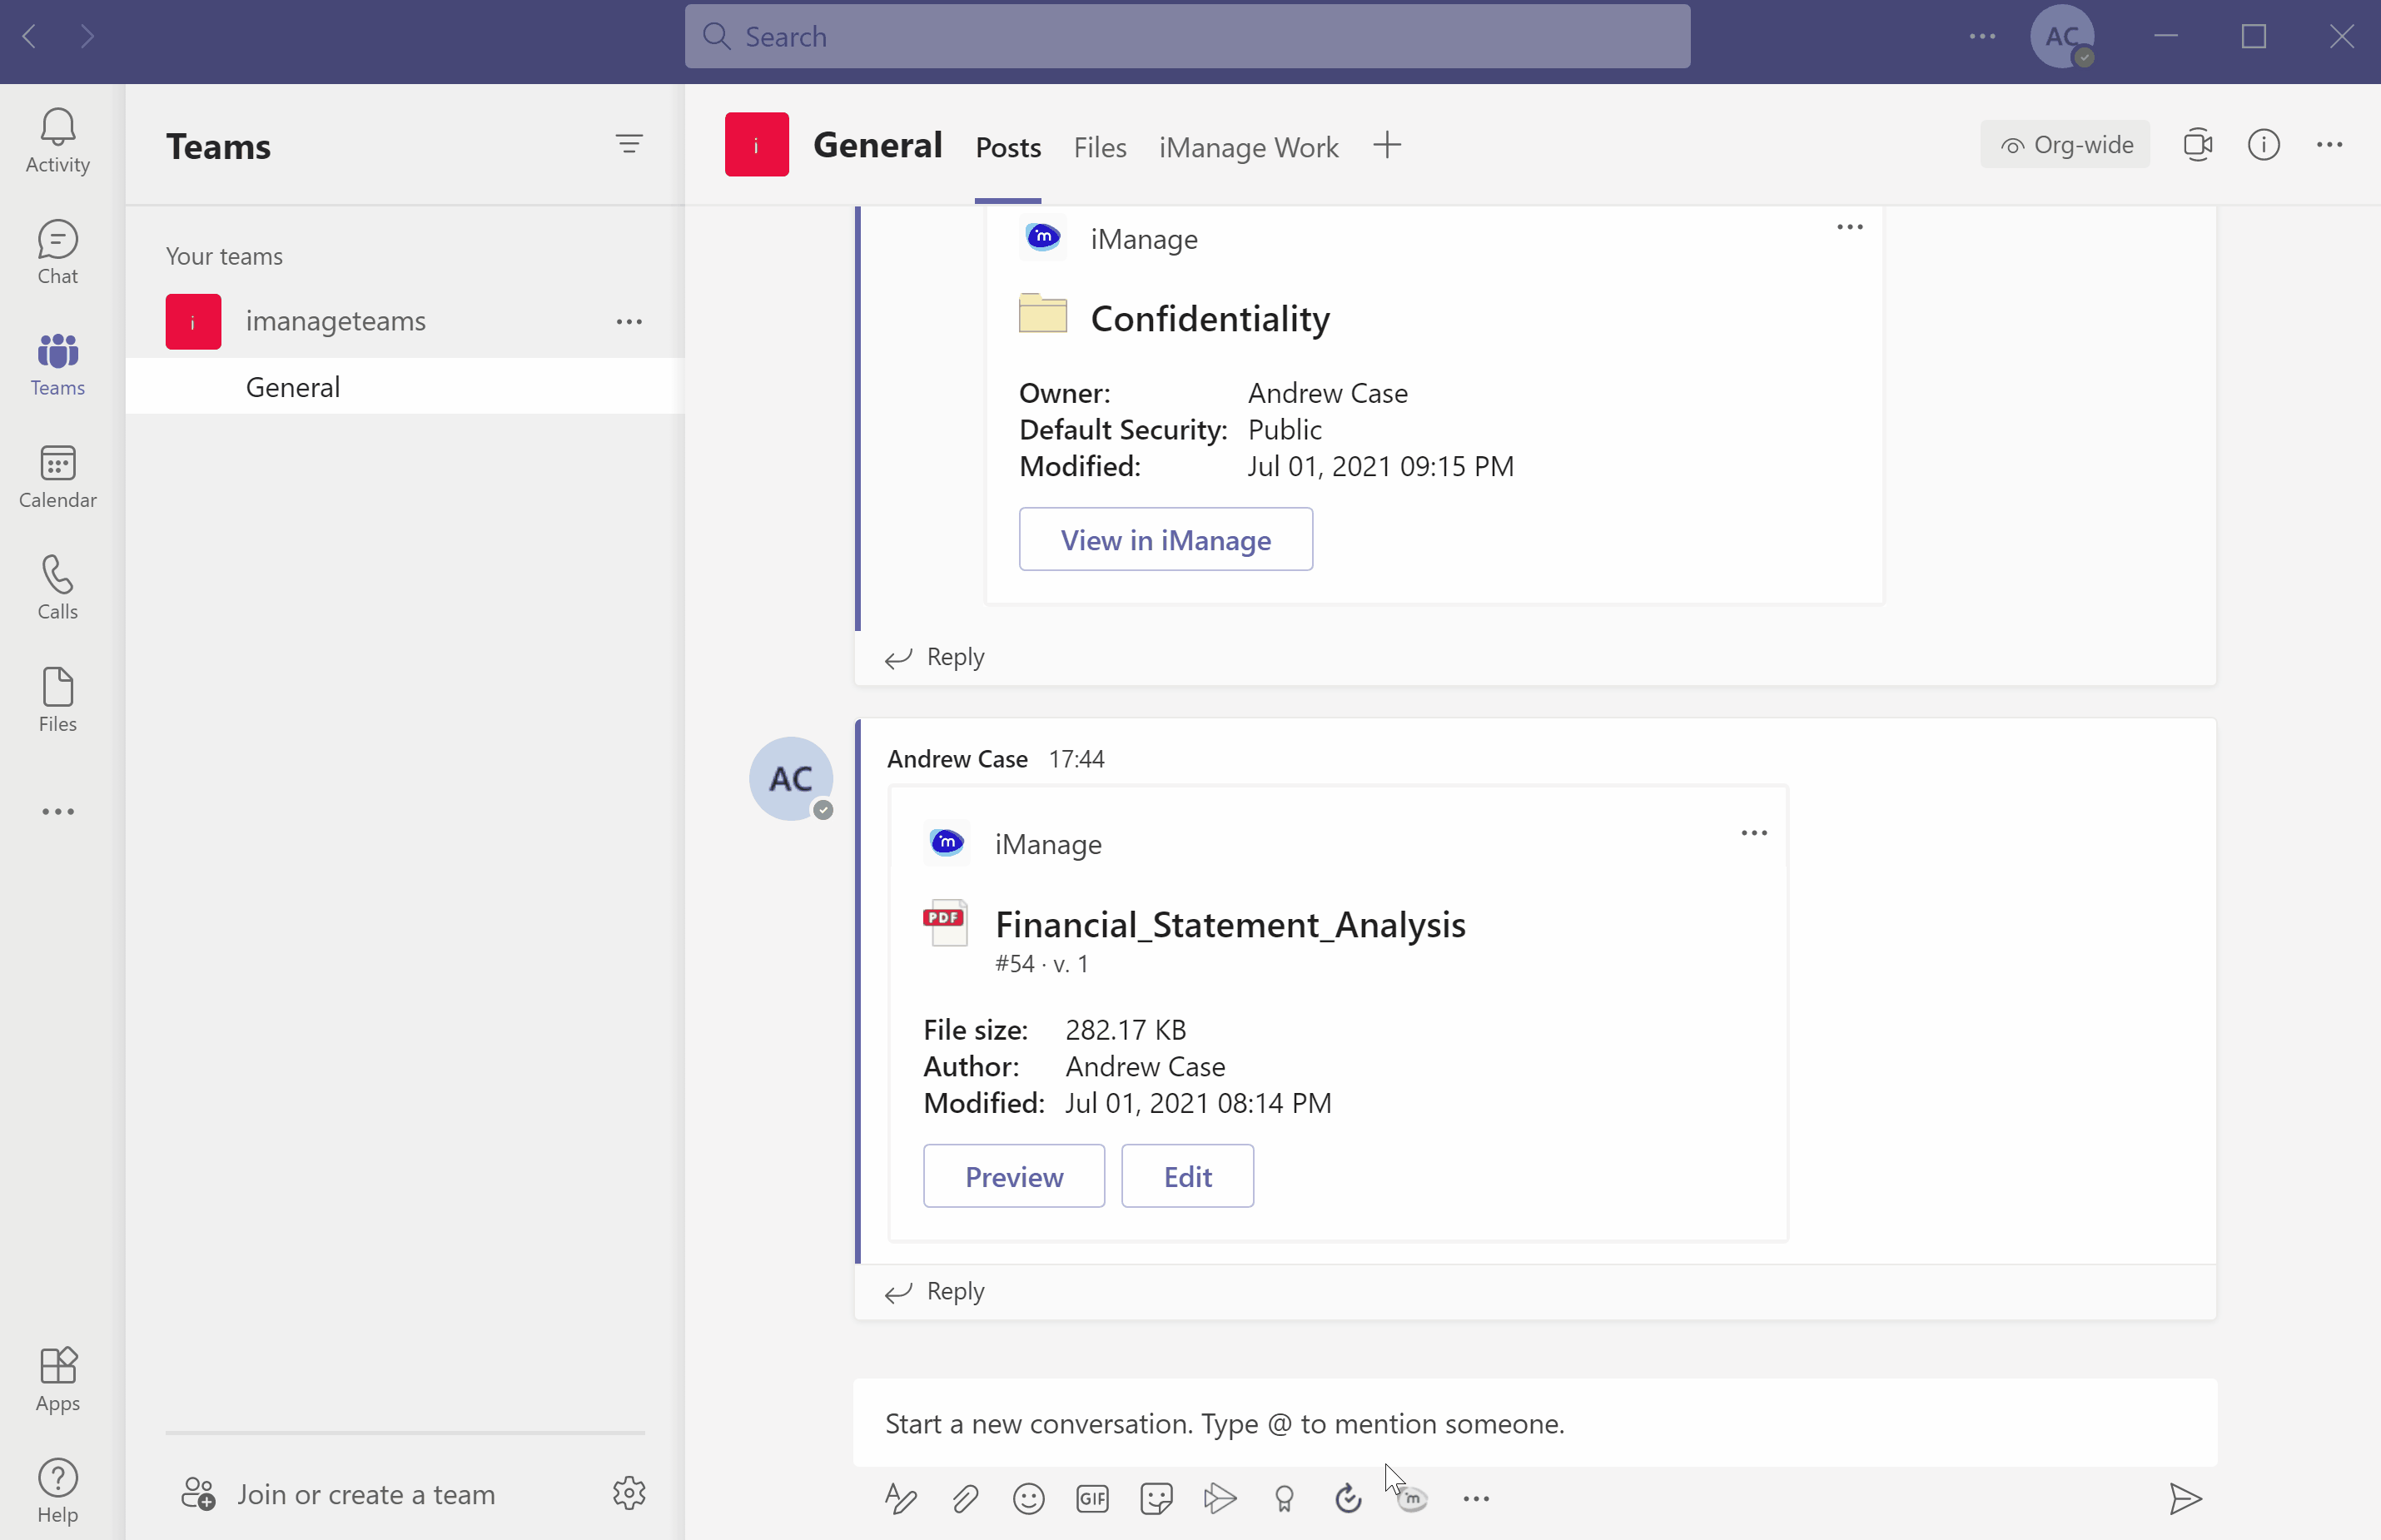 Searching in a messaging extension window - iManage Work